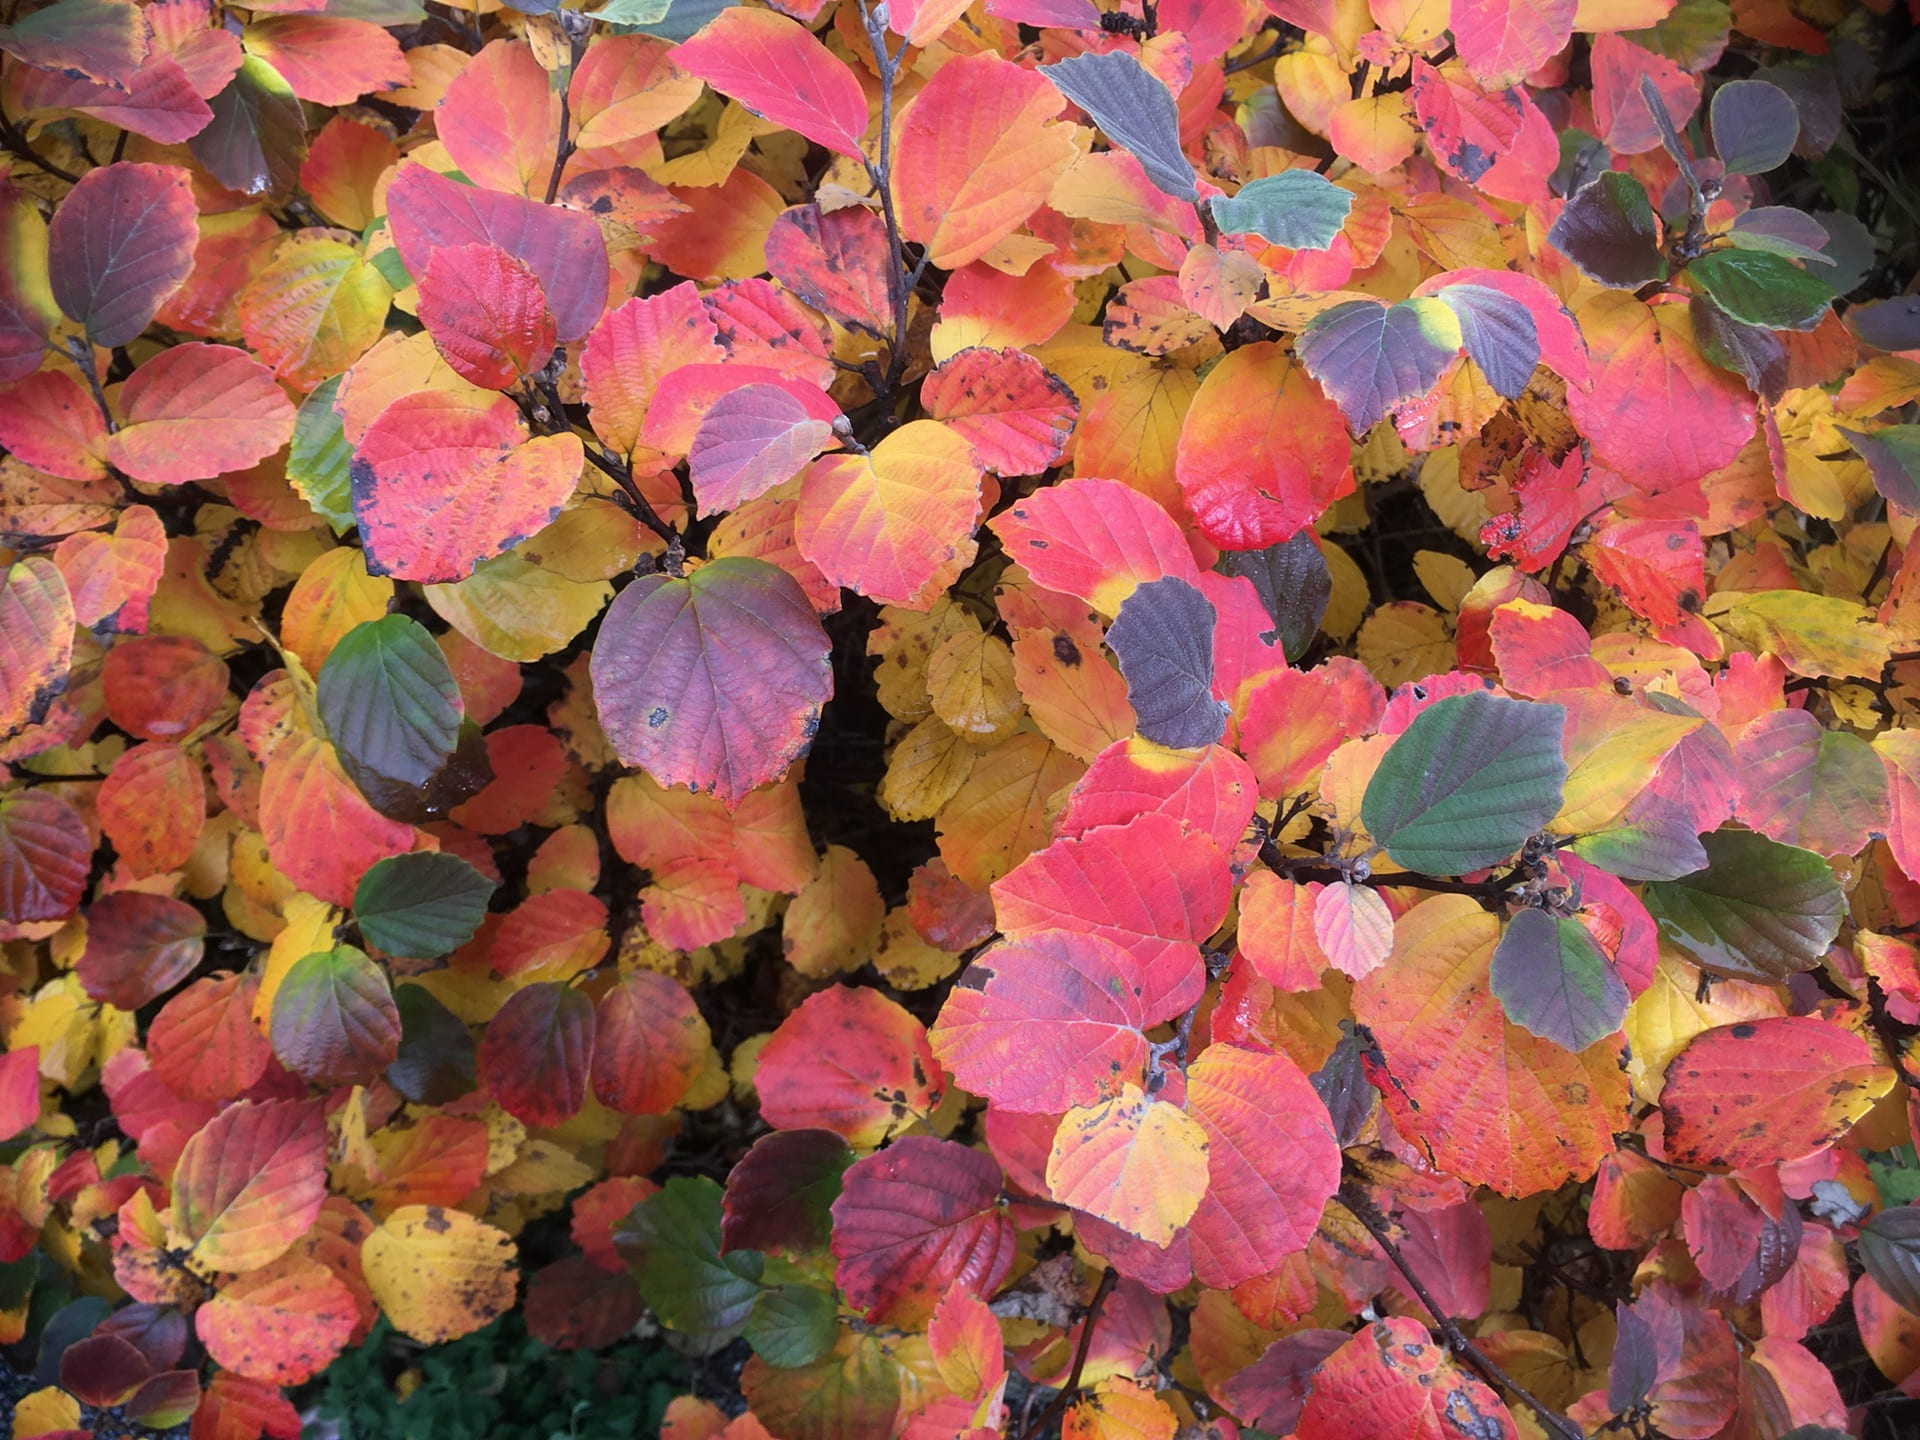 Every color of the rainbow is represented in the foliage of Fothergilla major.